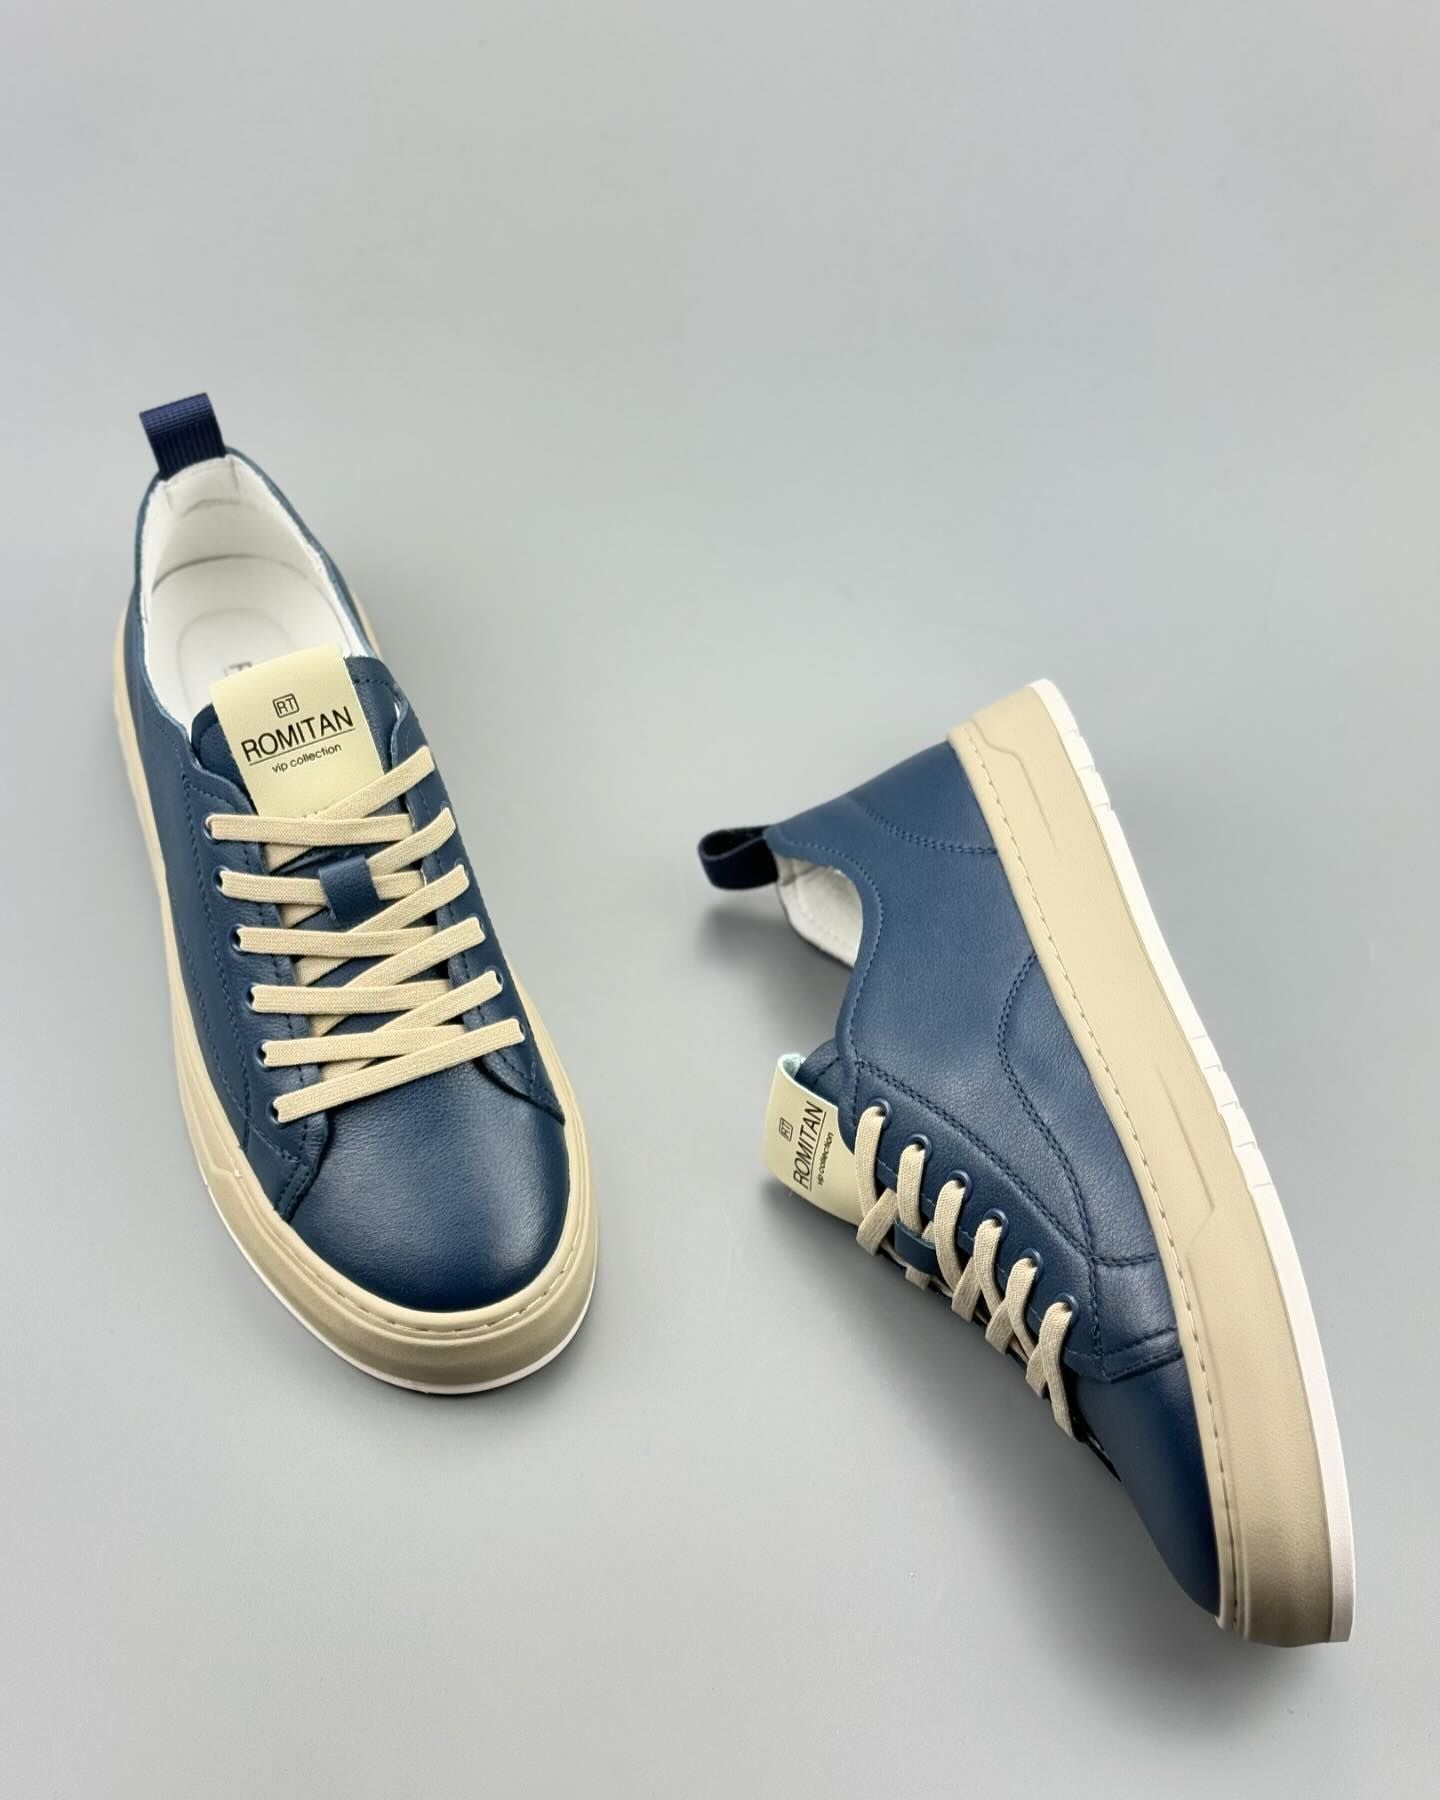 Blue casual leather sneakers